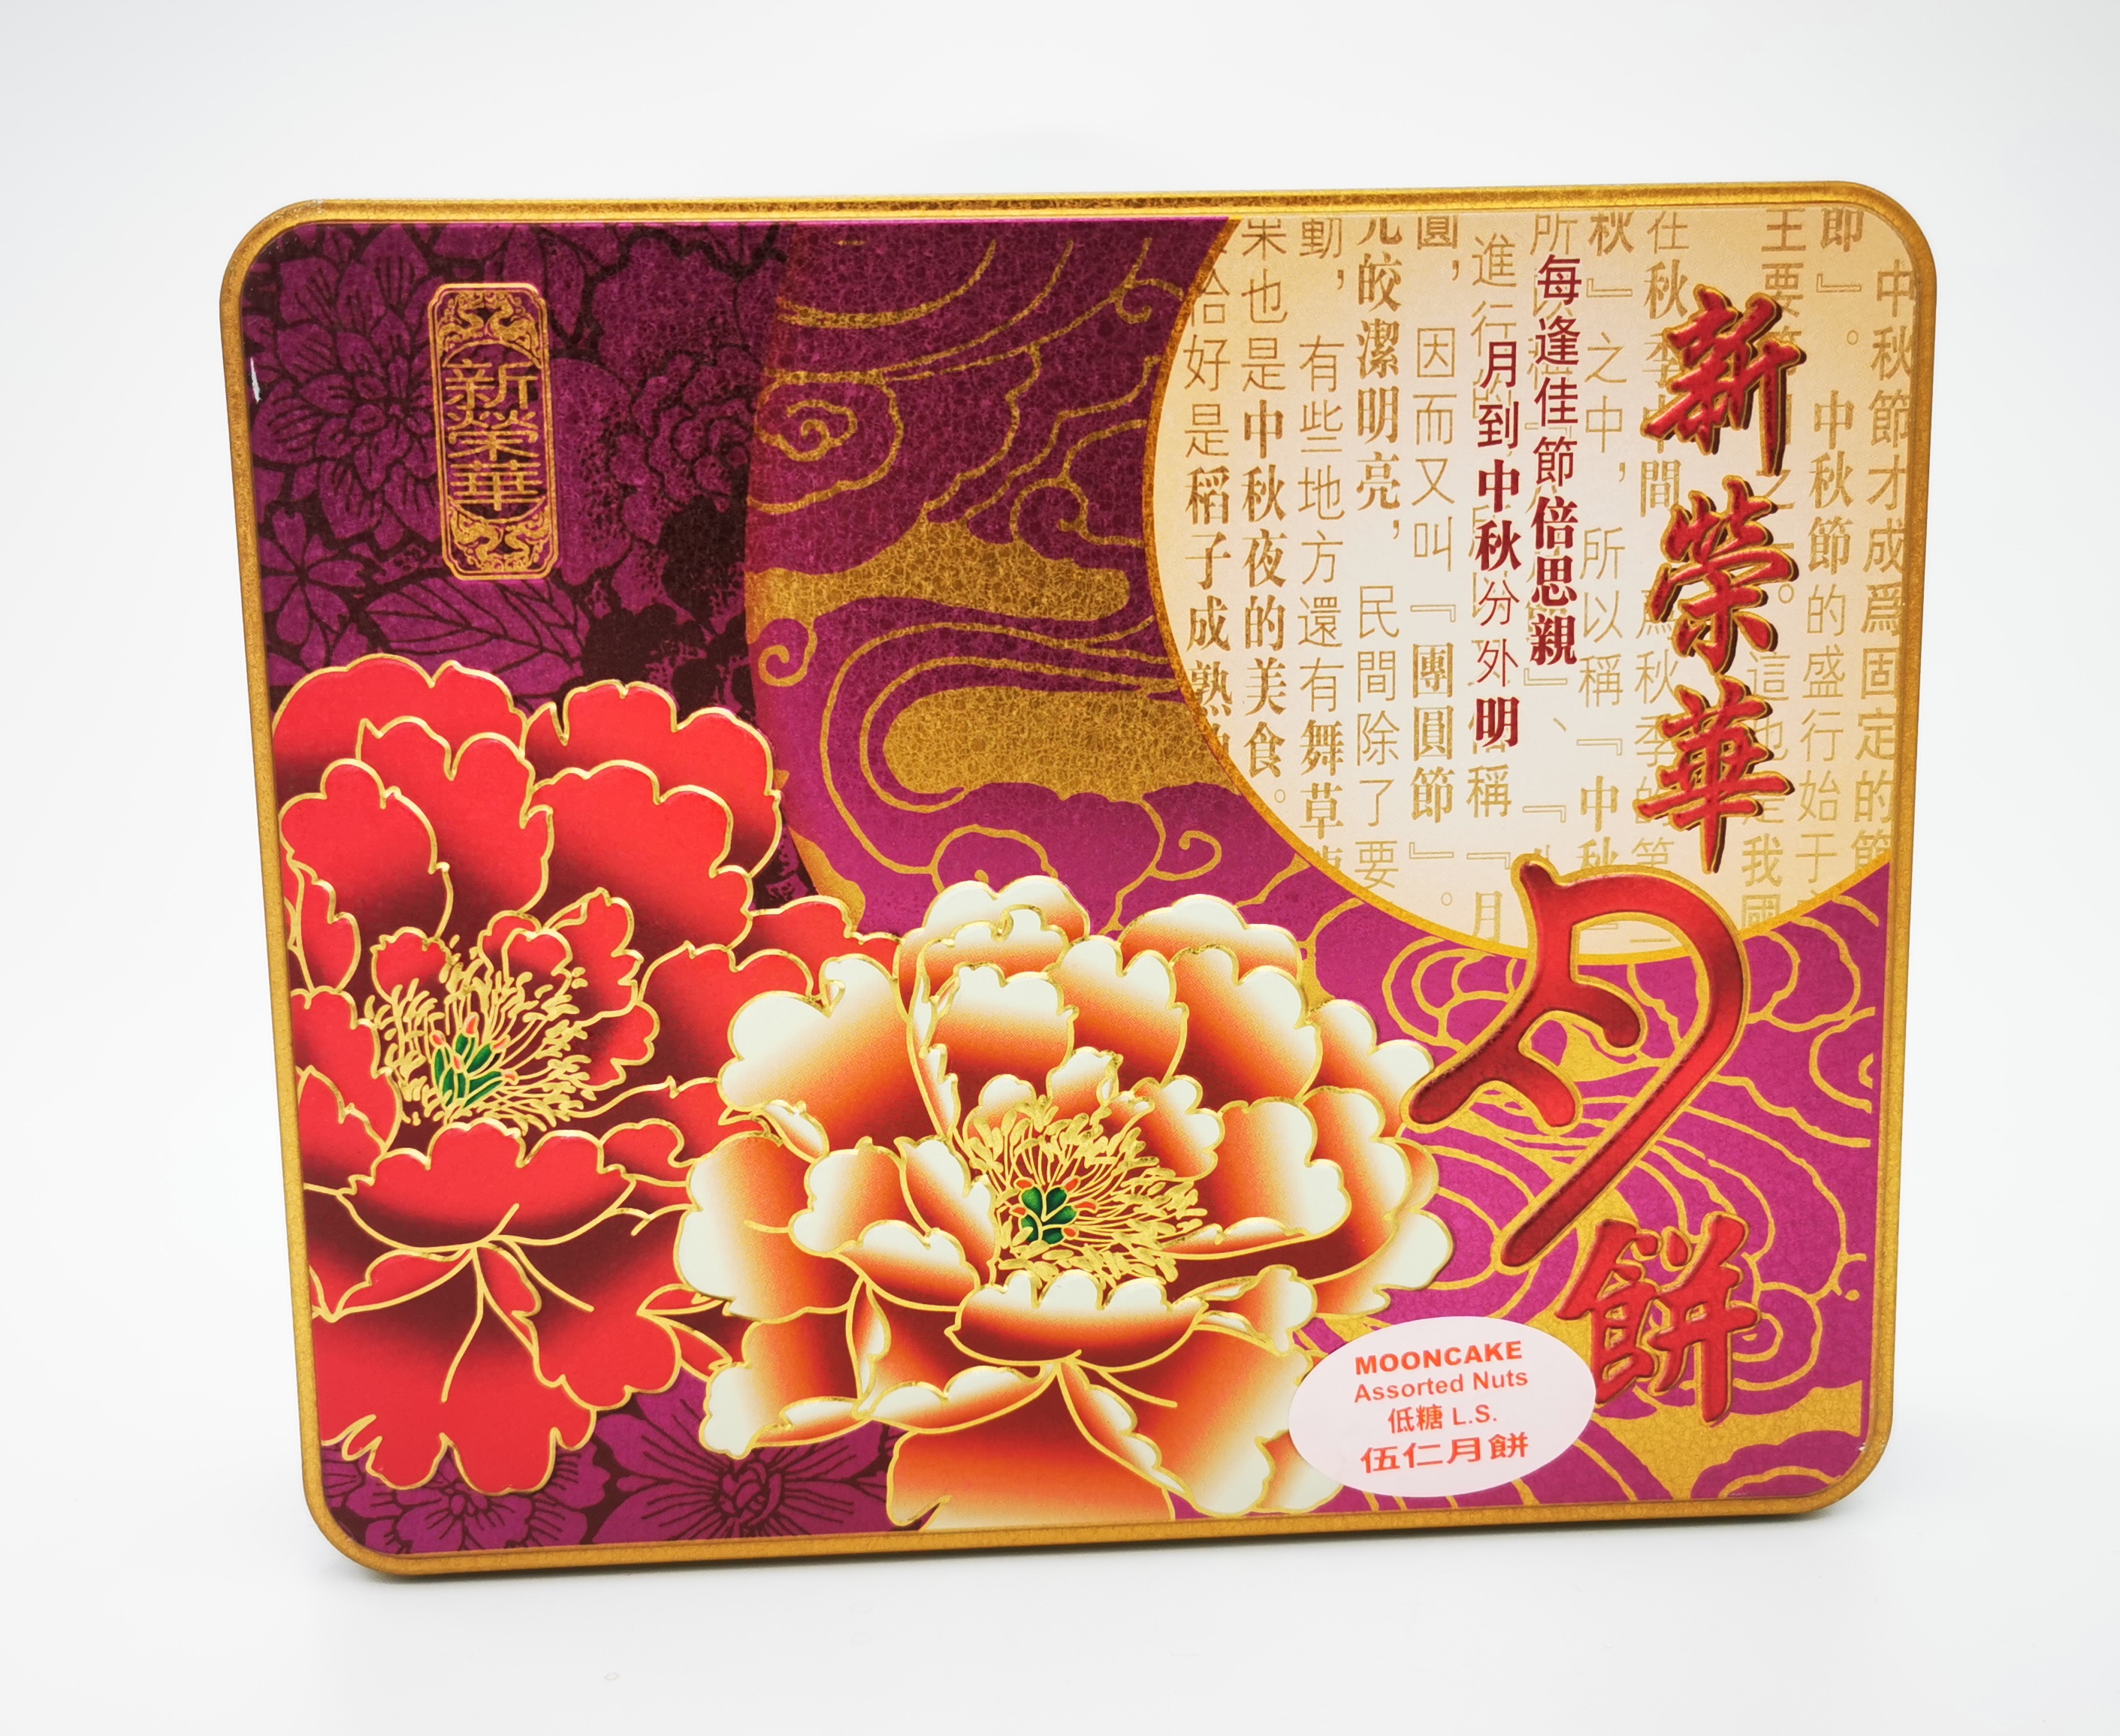 BRAND Assorted Nuts Mooncakes (Less Sugar) 740g (4pcs)